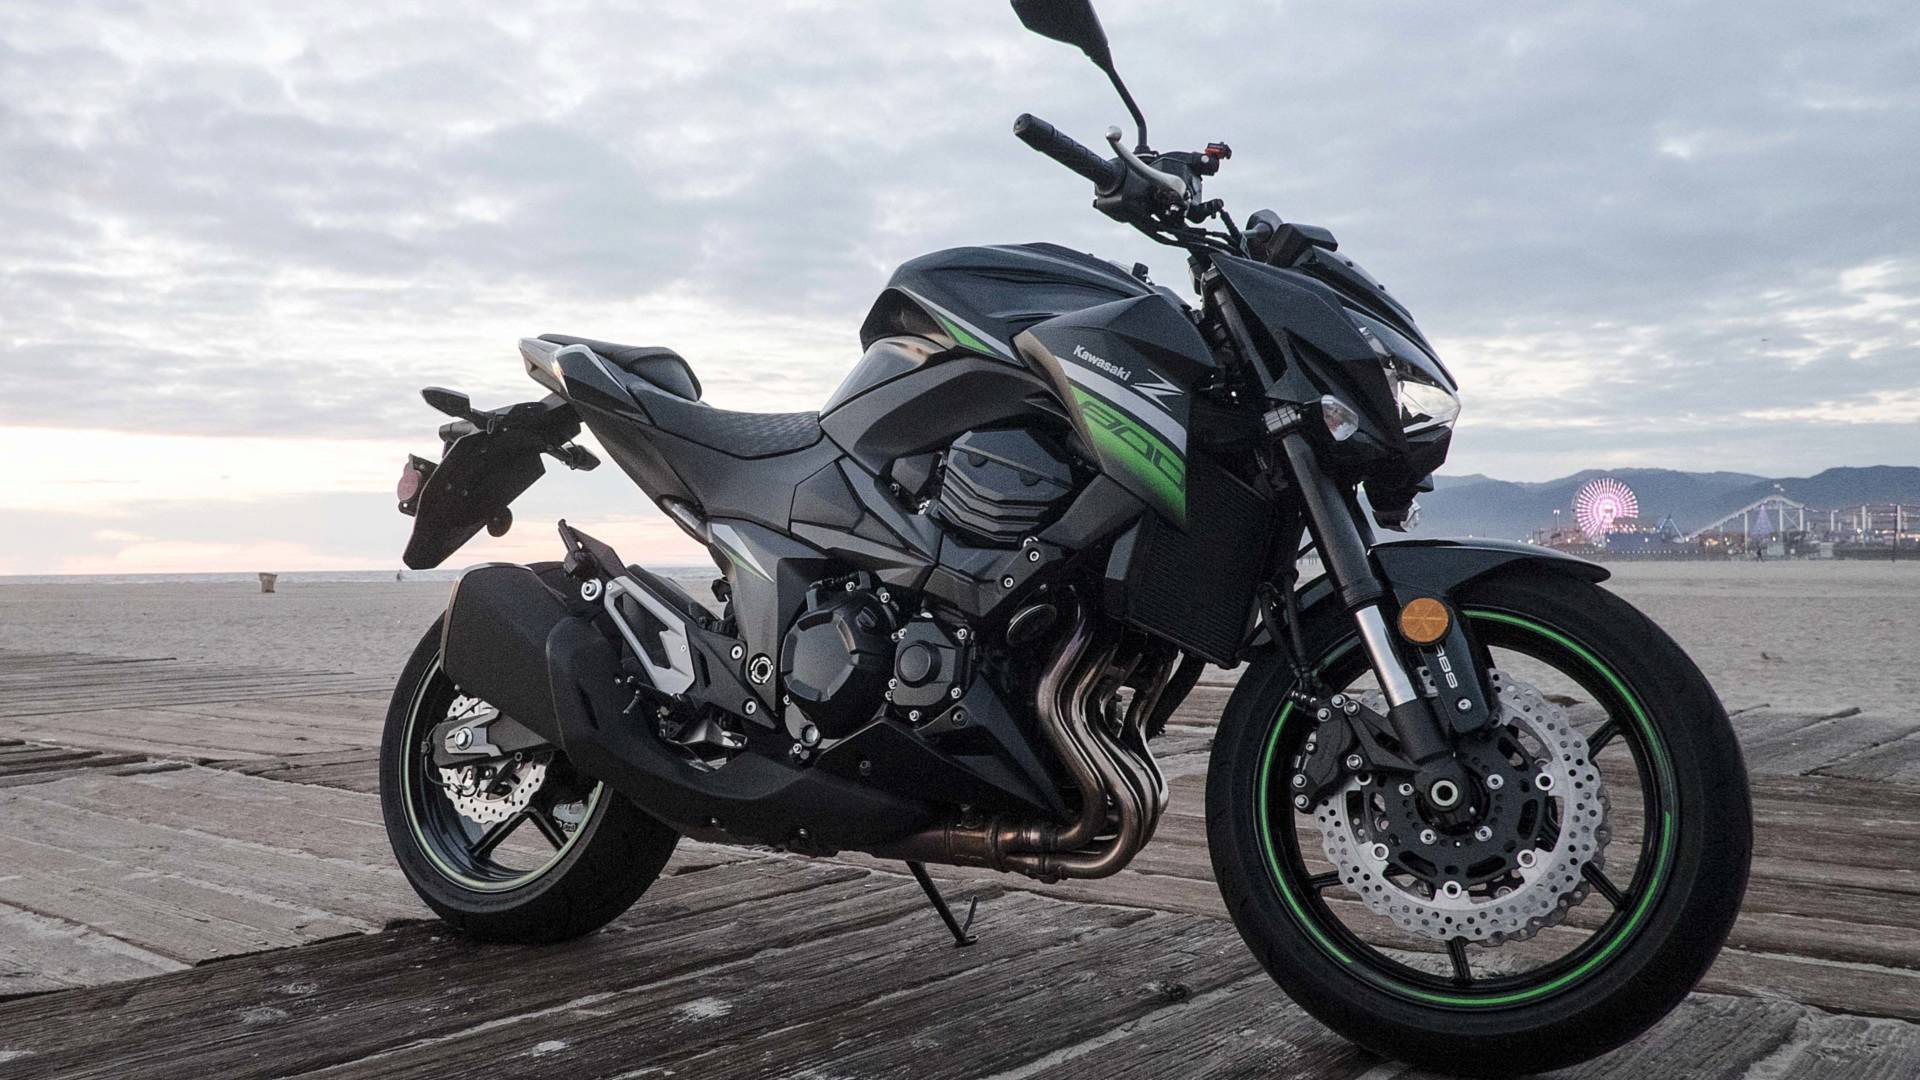 A Month with the 2016 Kawasaki Z800